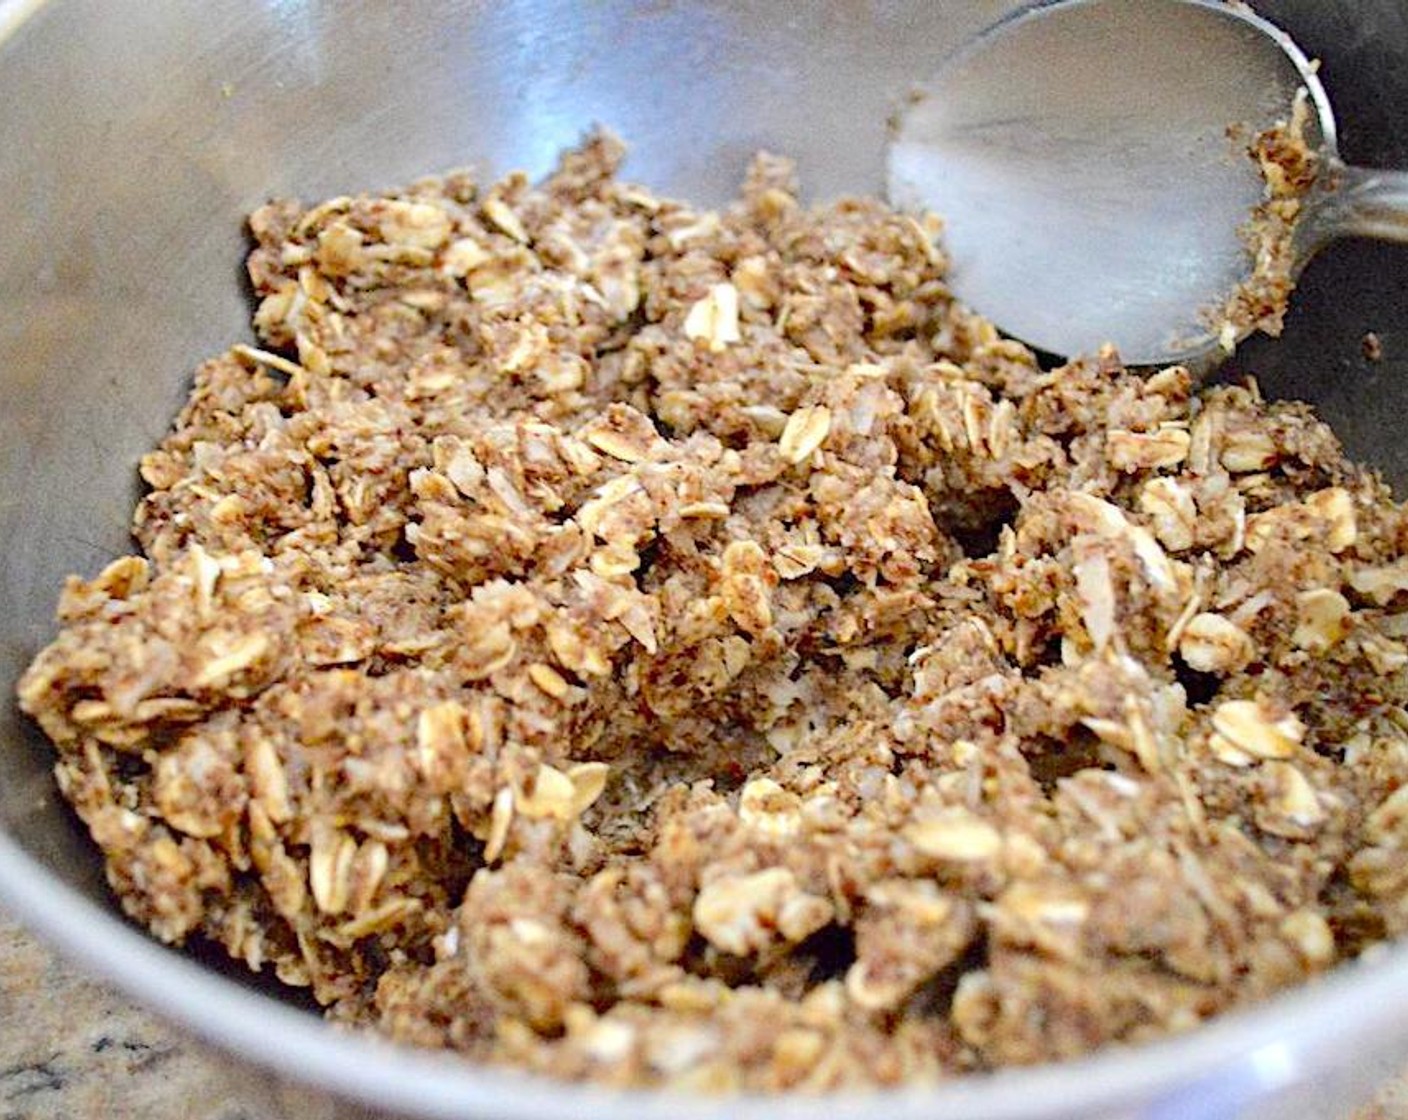 step 1 Stir Old Fashioned Rolled Oats (1 cup), Almond Butter (2/3 cup), Unsweetened Coconut Flakes (1/2 cup), Flaxseeds (1/2 cup), Honey (2 Tbsp), Ground Ginger (1/4 tsp), and Ground Nutmeg (1/4 tsp) thoroughly in a large bowl. Put the mixture in the refrigerator for 30 minutes to firm up enough to roll.